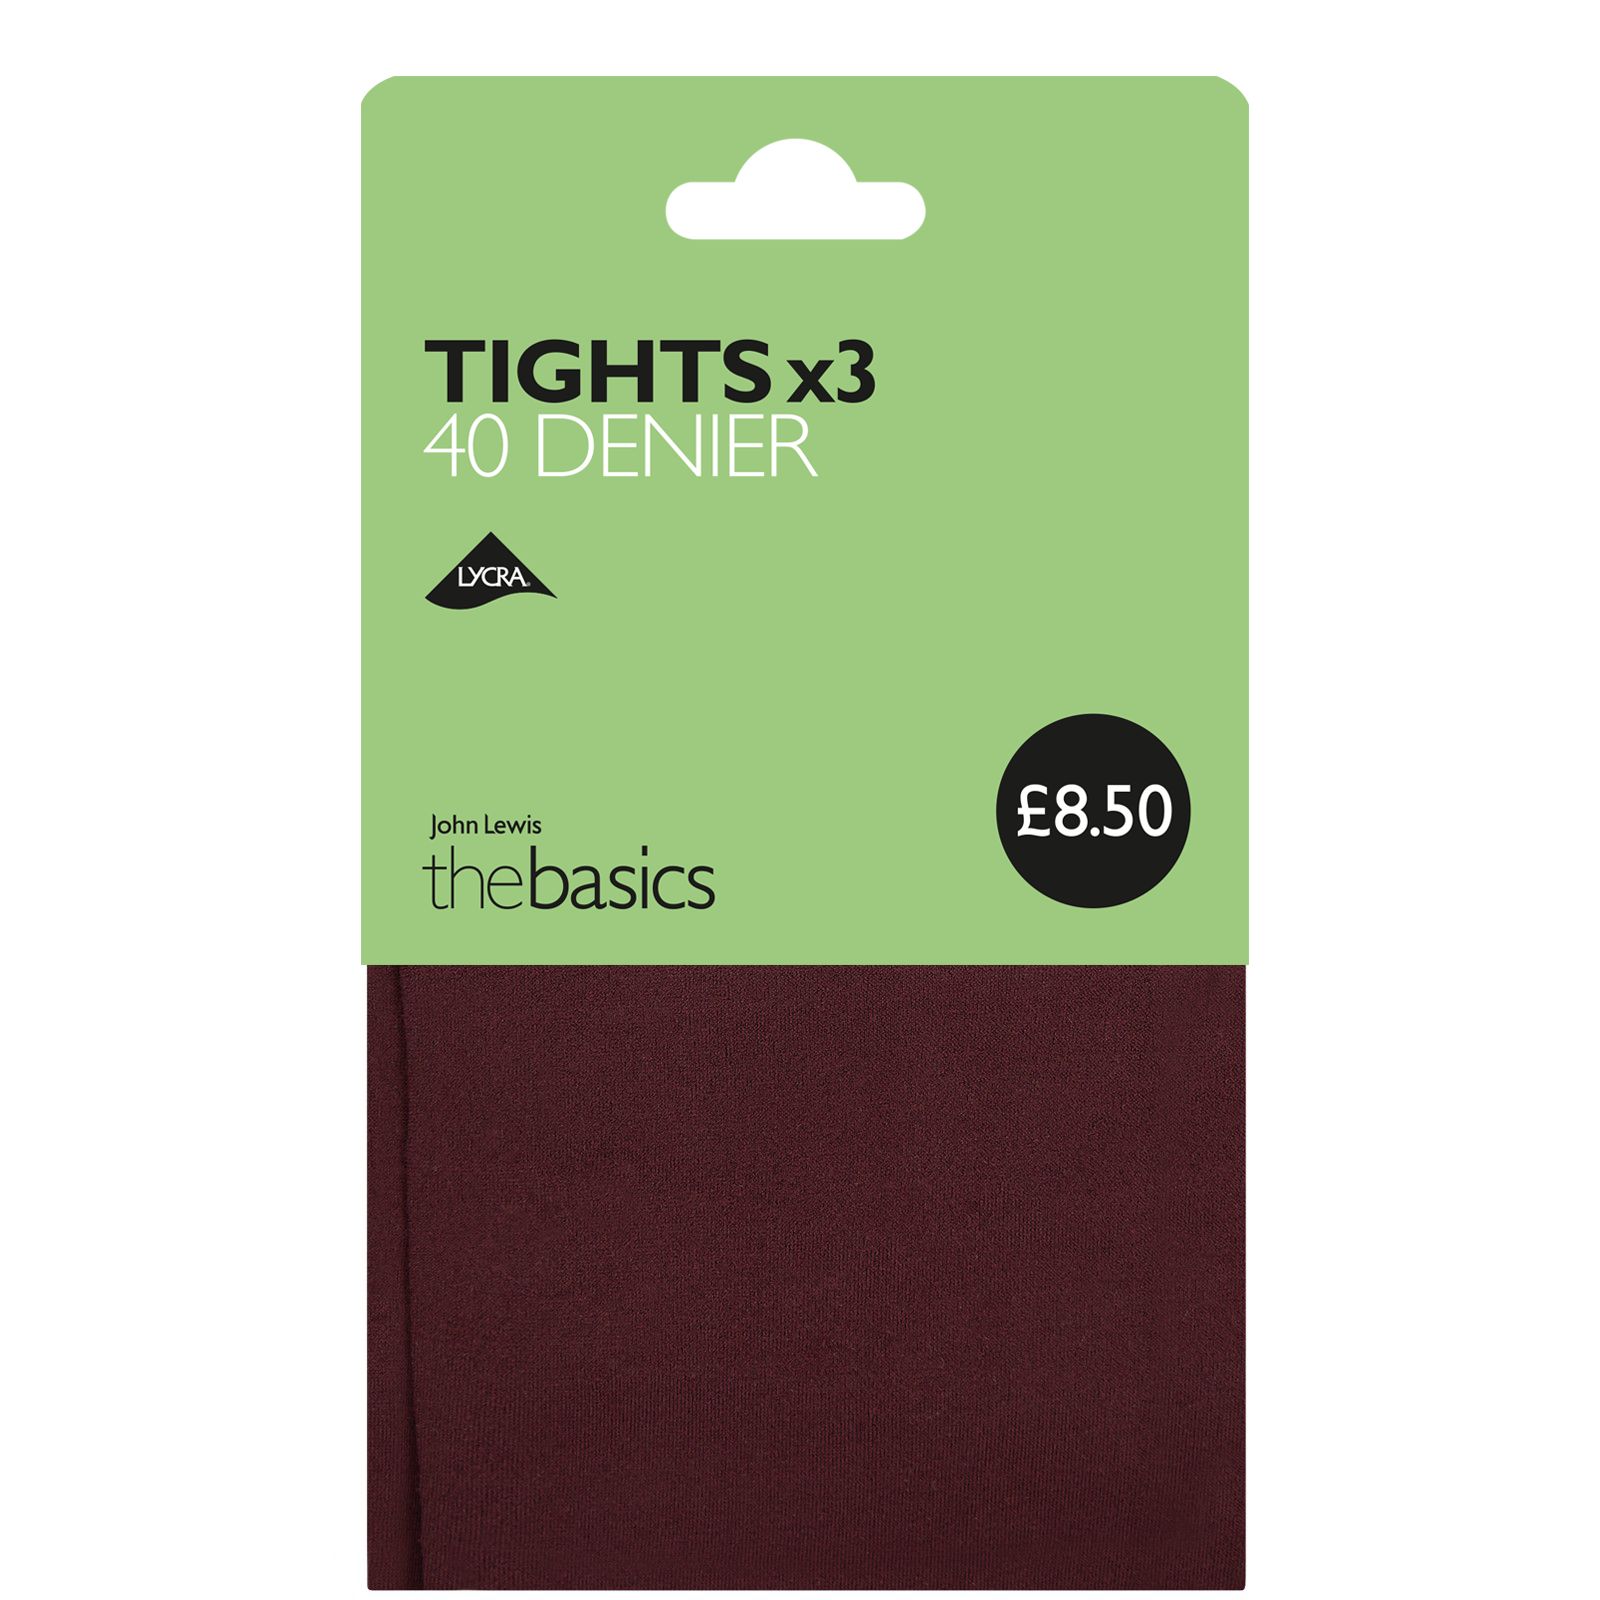 John Lewis 40 Denier Opaque Tights, Pack of 3